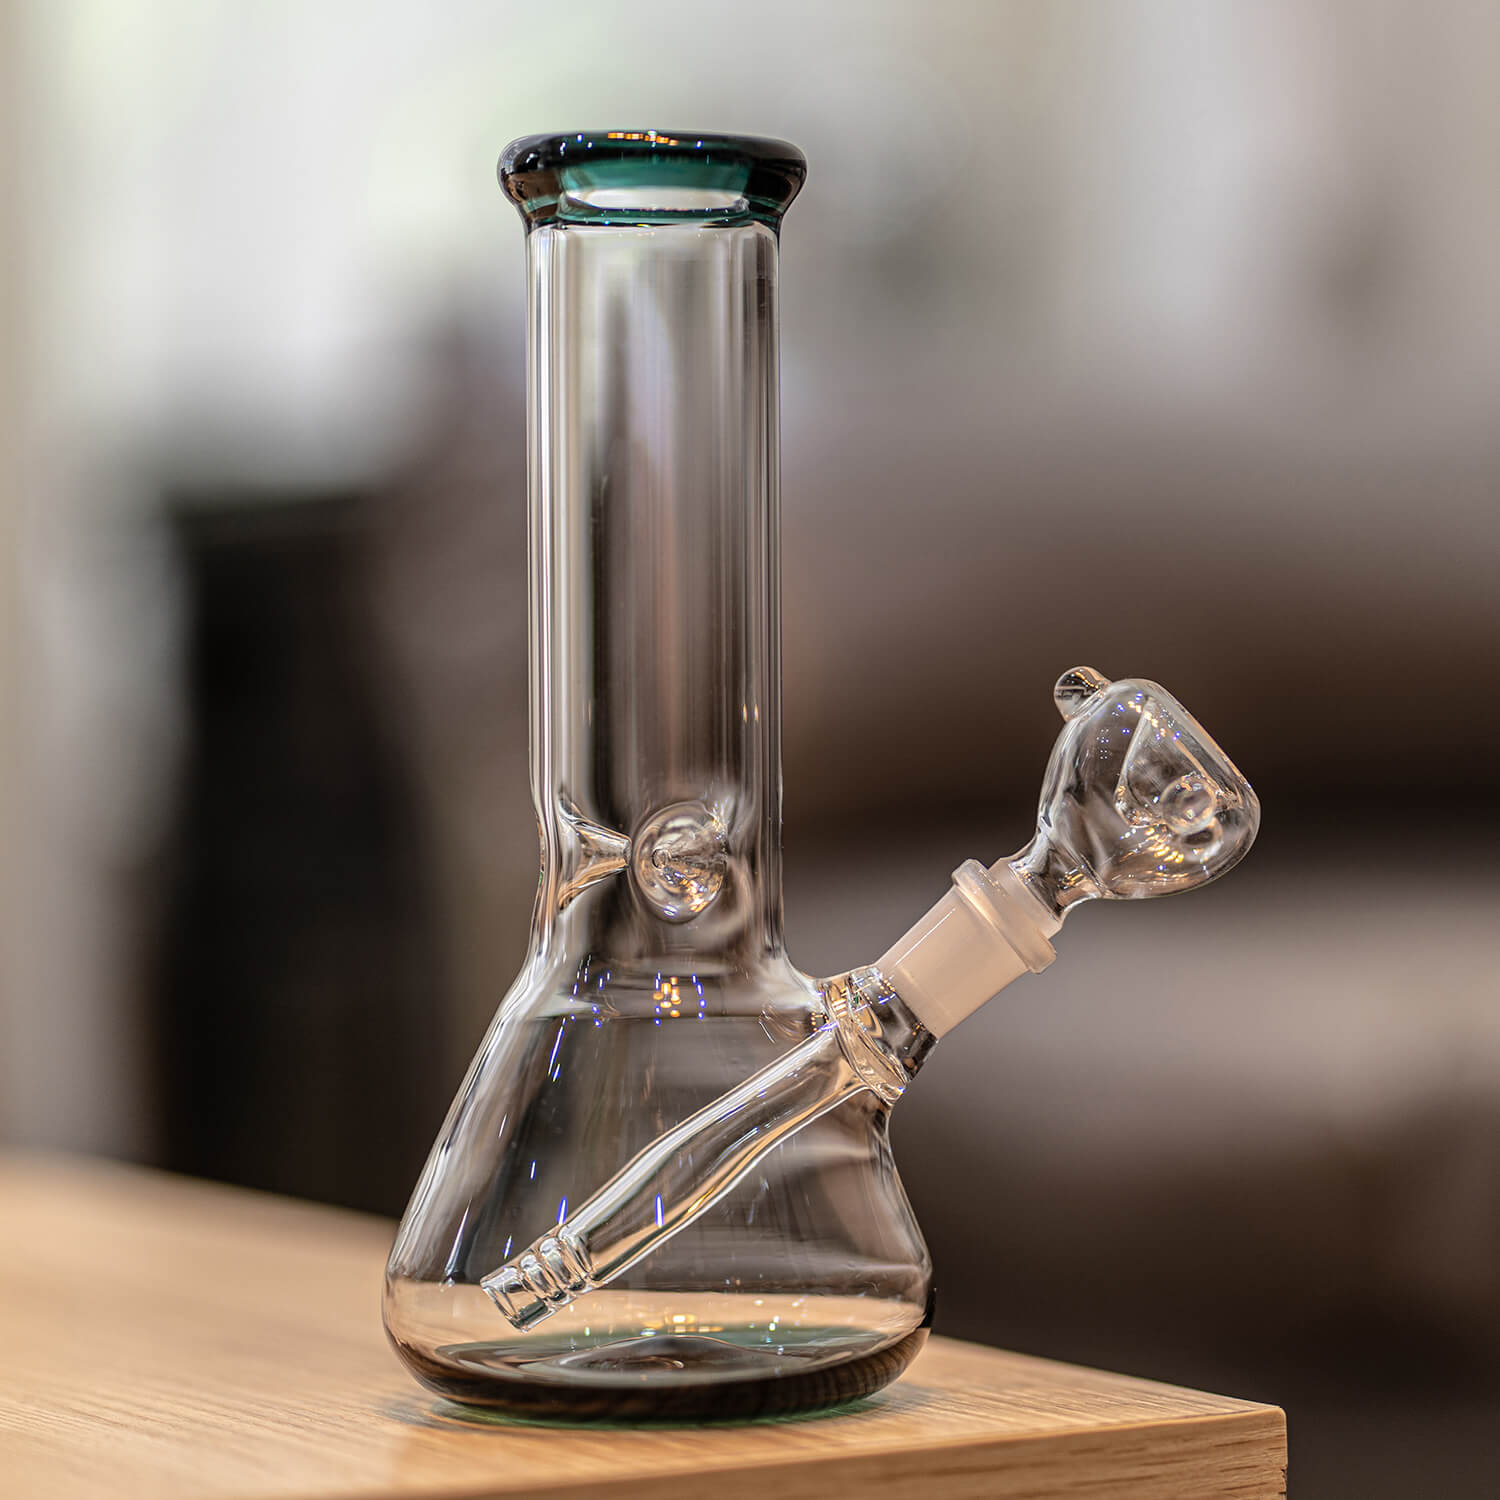 how to clean a bong